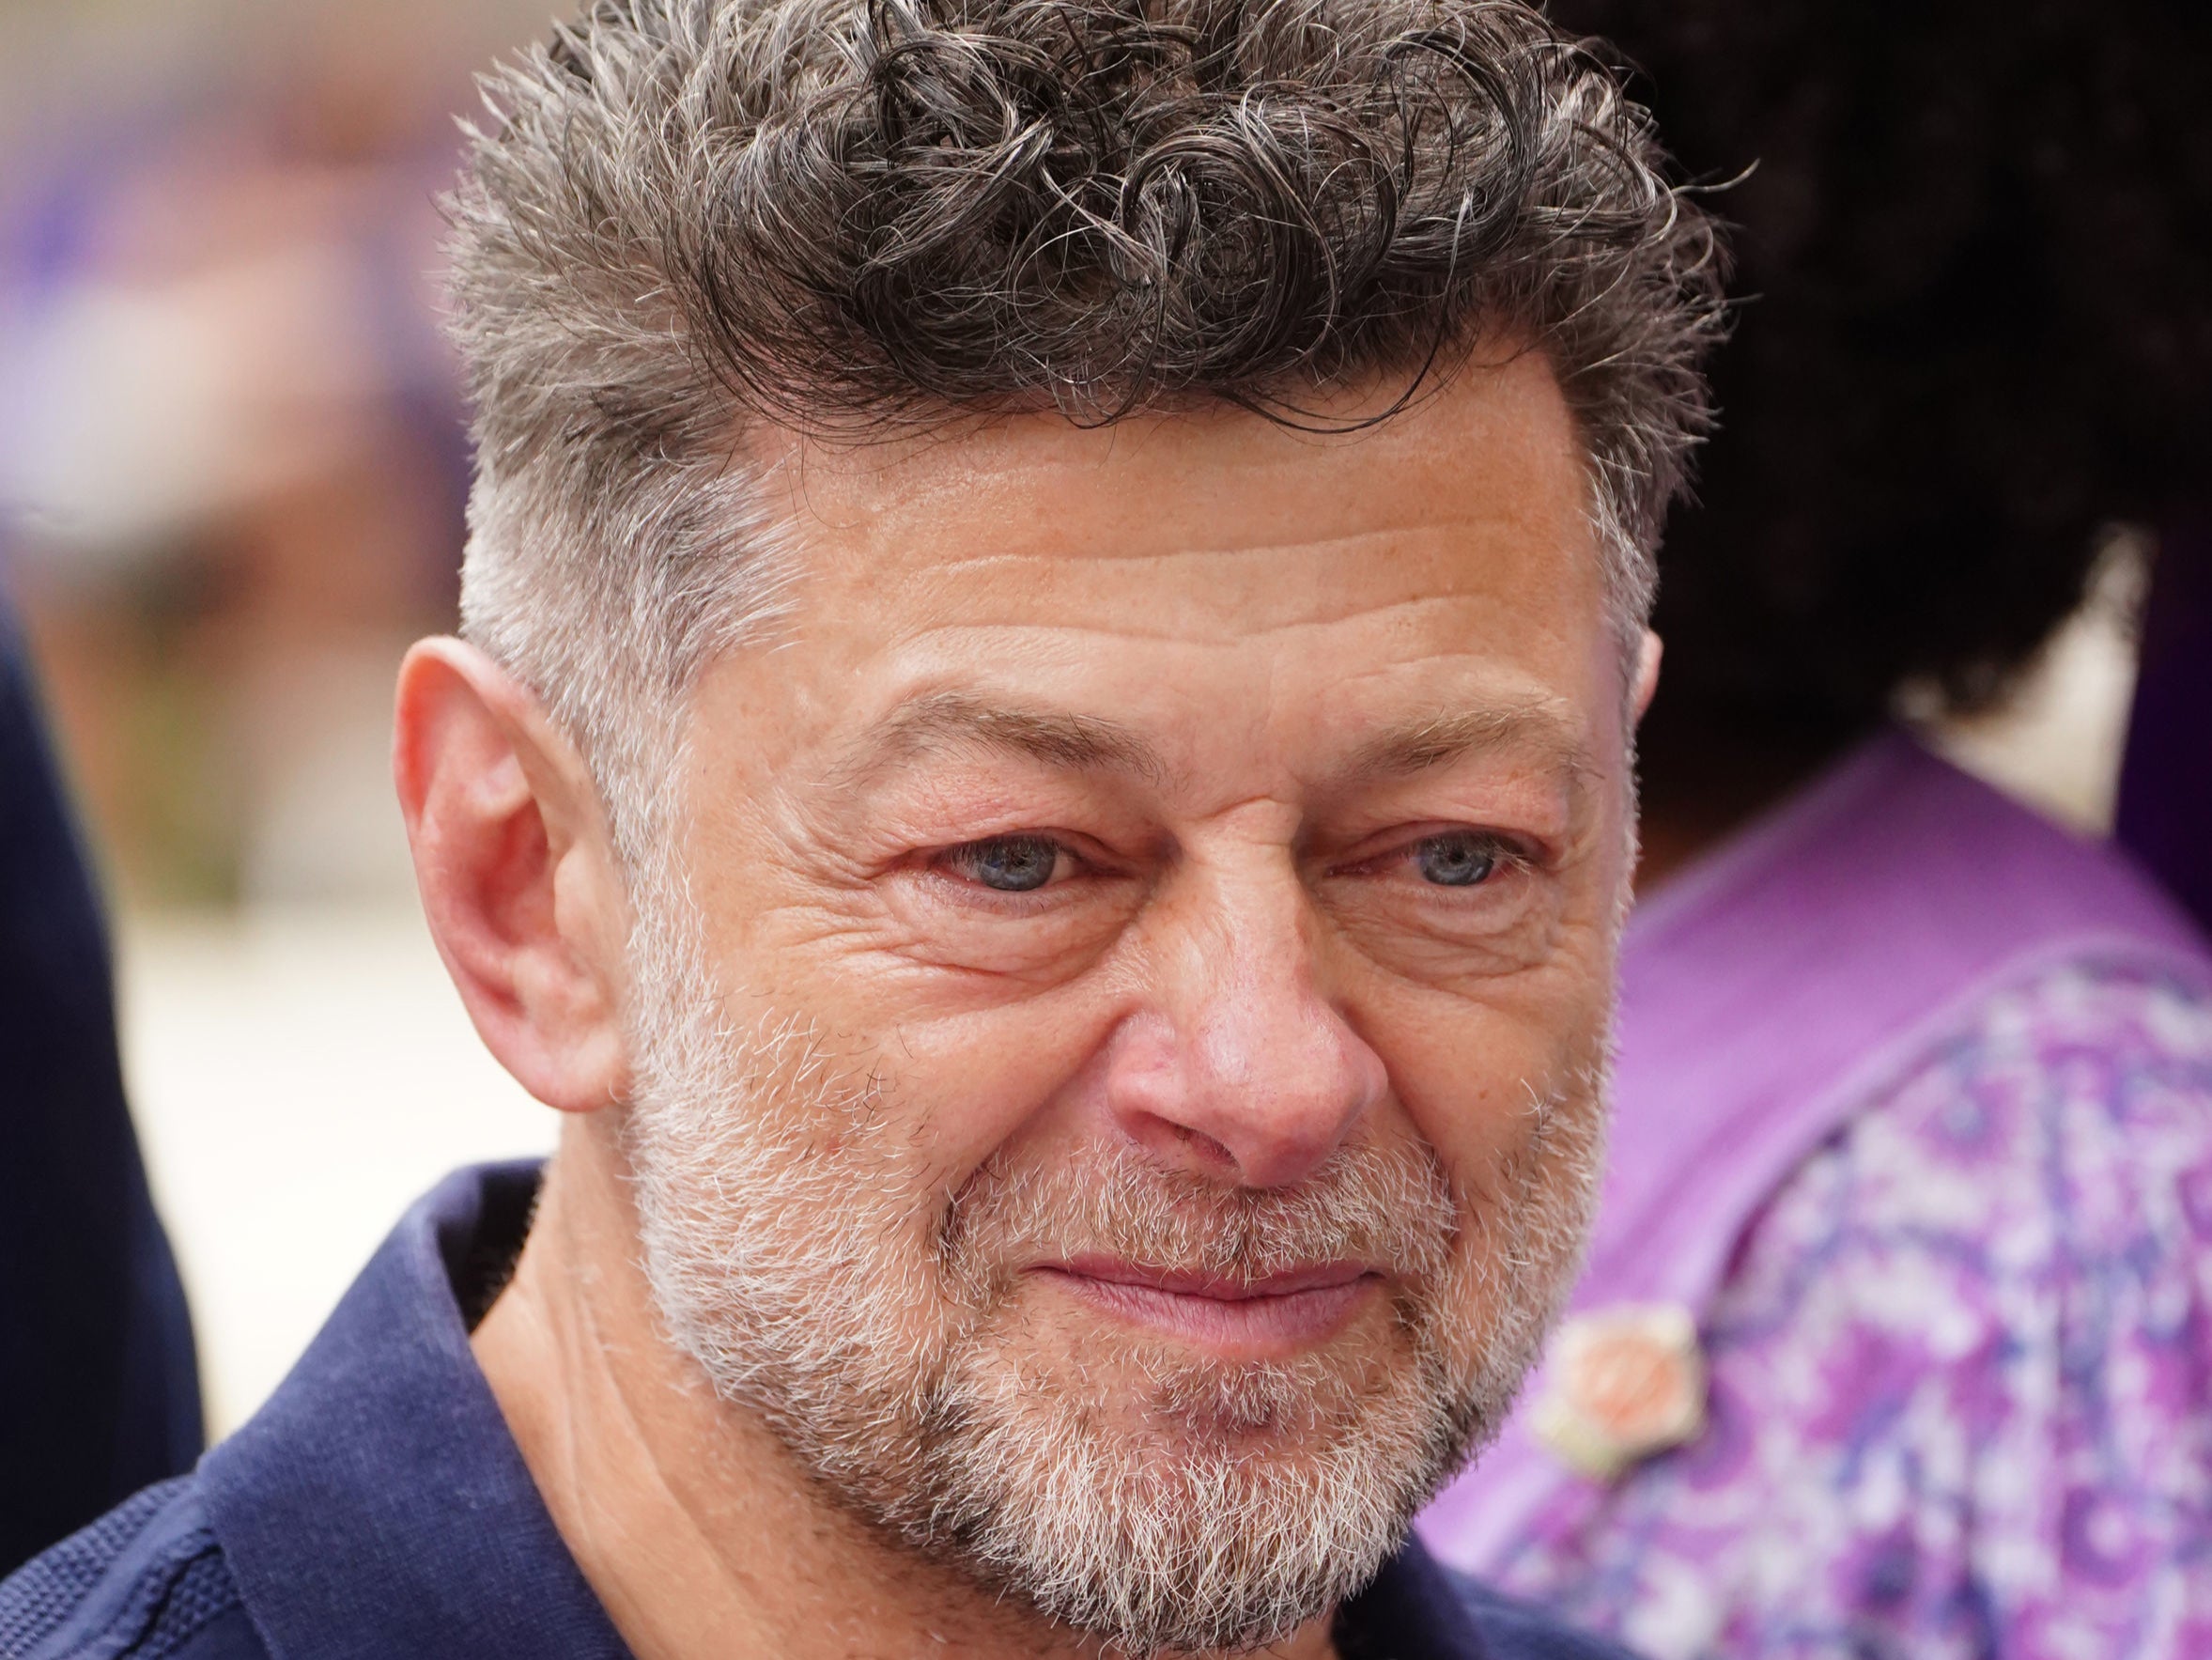 Andy Serkis takes part in a protest by members of the British actors union Equity in Leicester Square, London